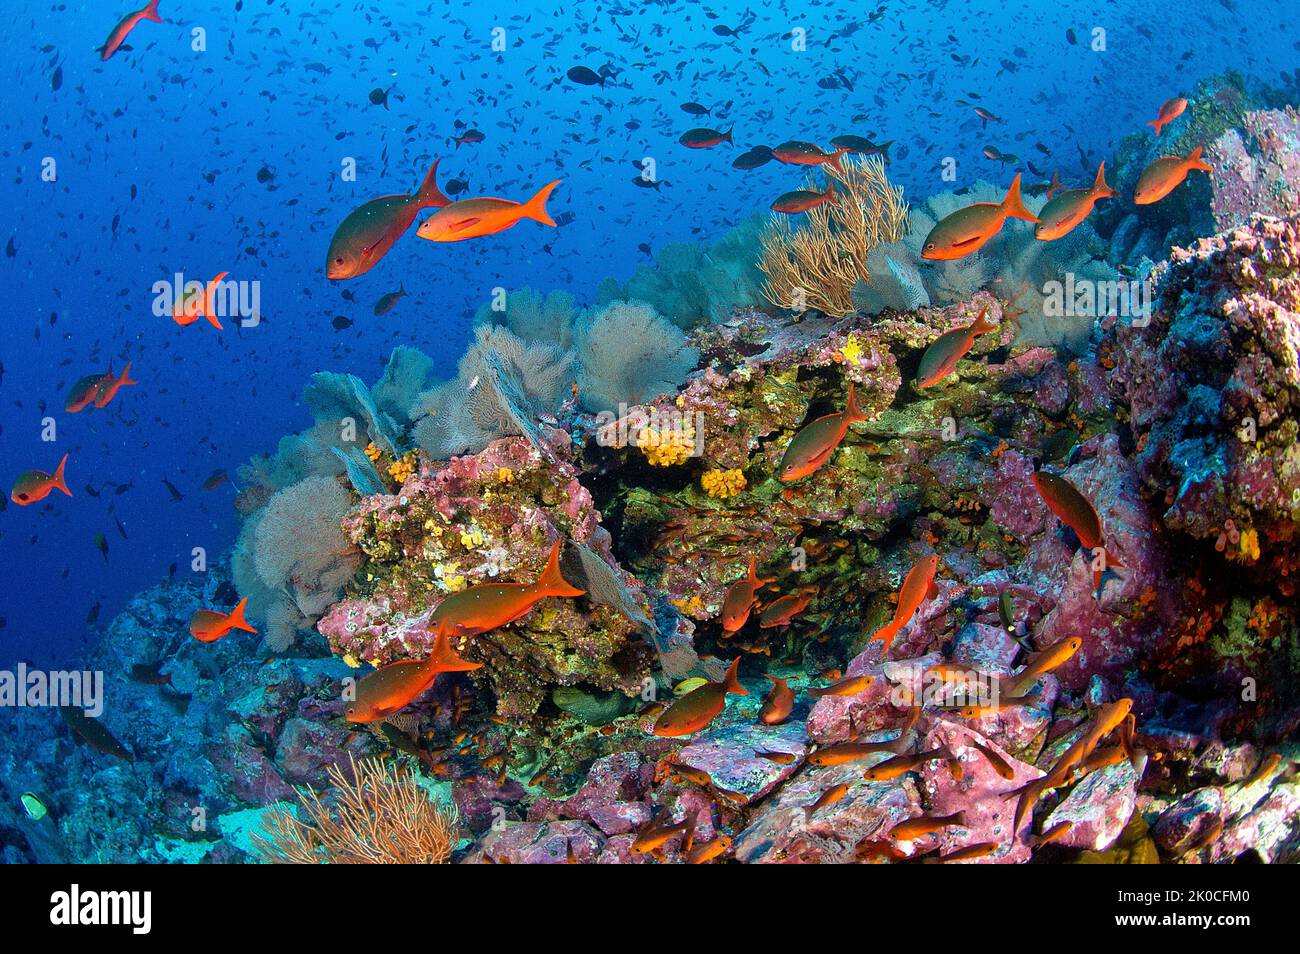 Pacific Creolefish (Paranthias colonus) at a coral reef, Malpelo island, UNESCO World Heritage site, Colombia Stock Photo